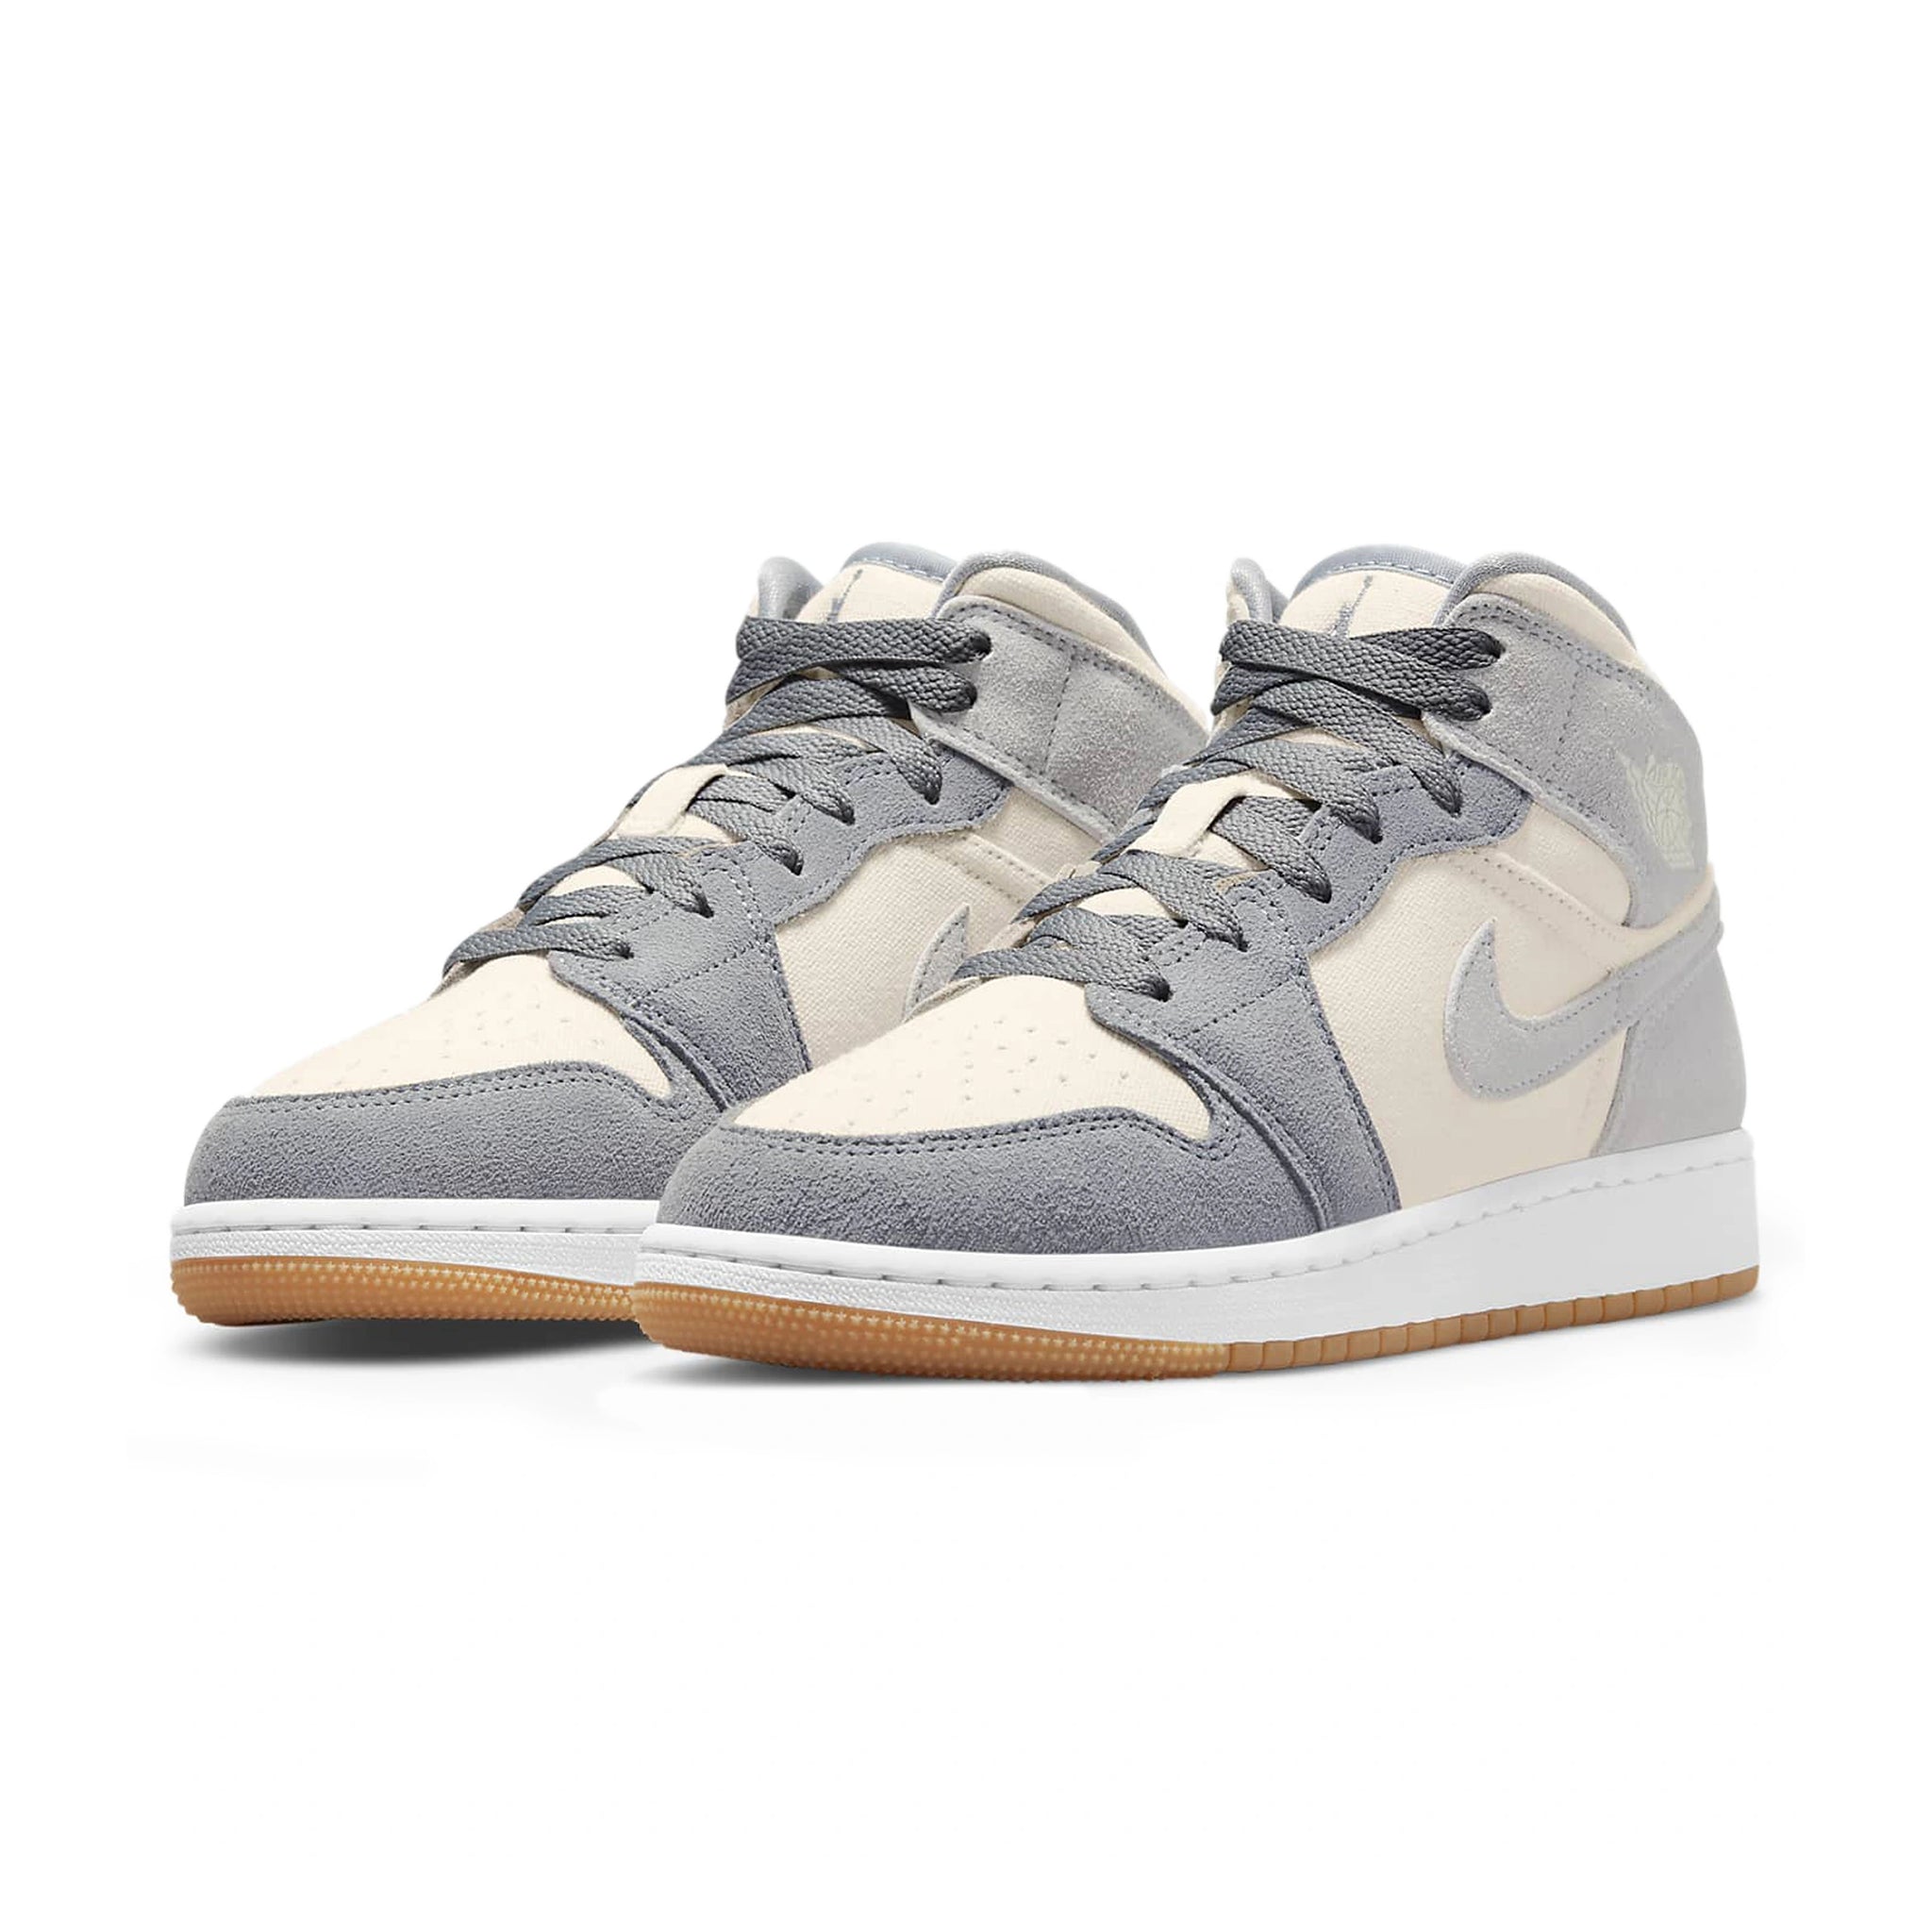 Front side view of Air Jordan 1 Mid SE Coconut Milk Particle Grey (GS) DN4346-100